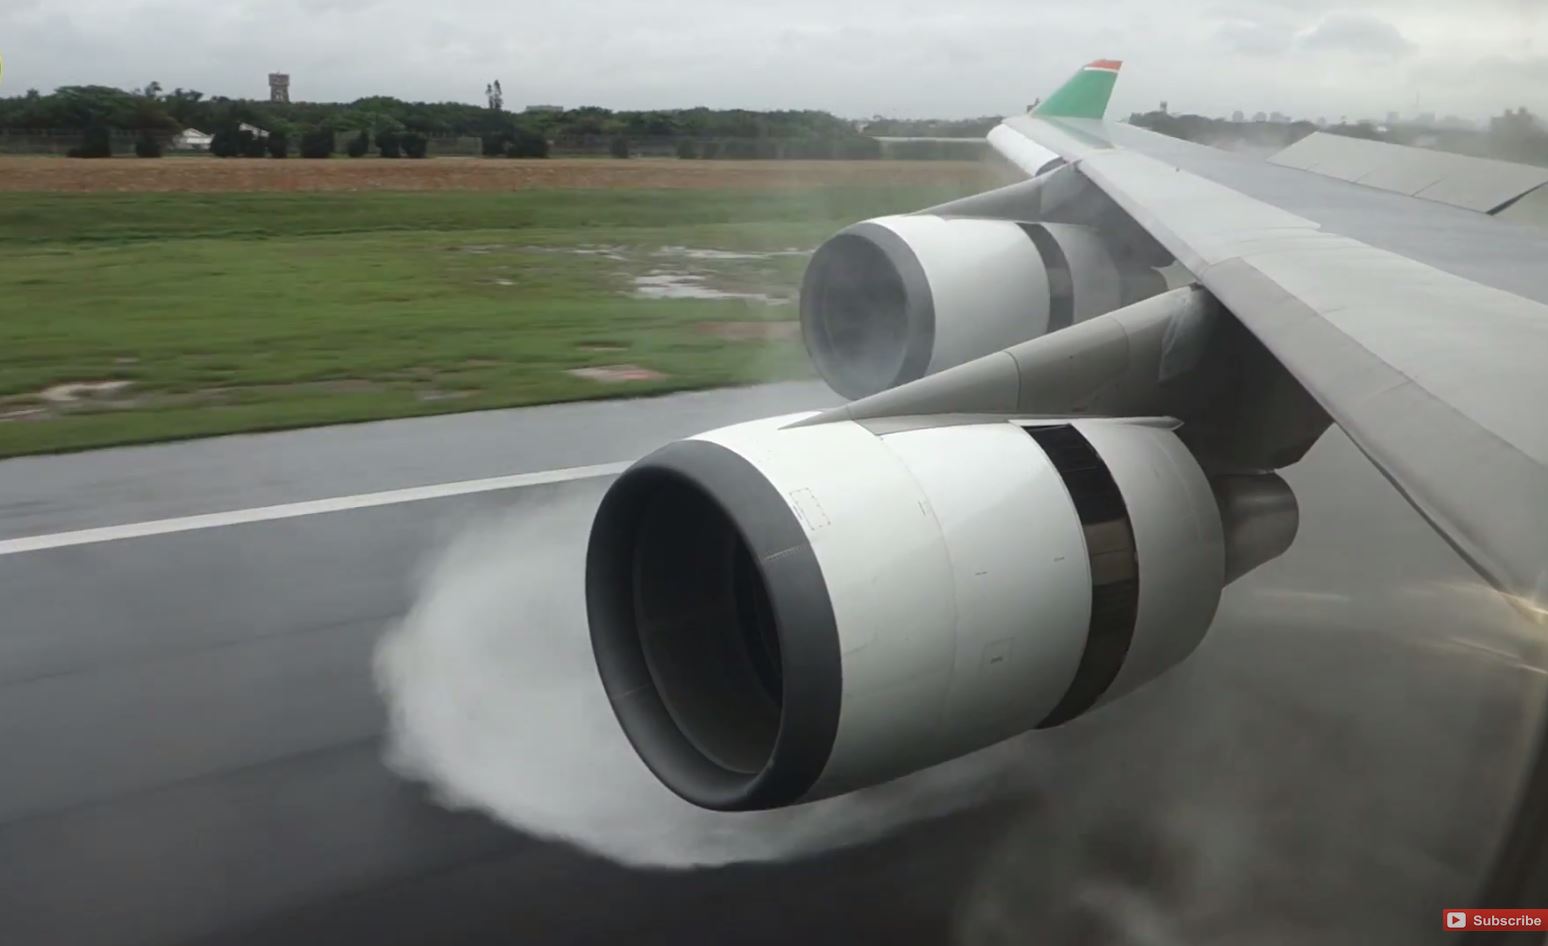 What is reverse thrust?